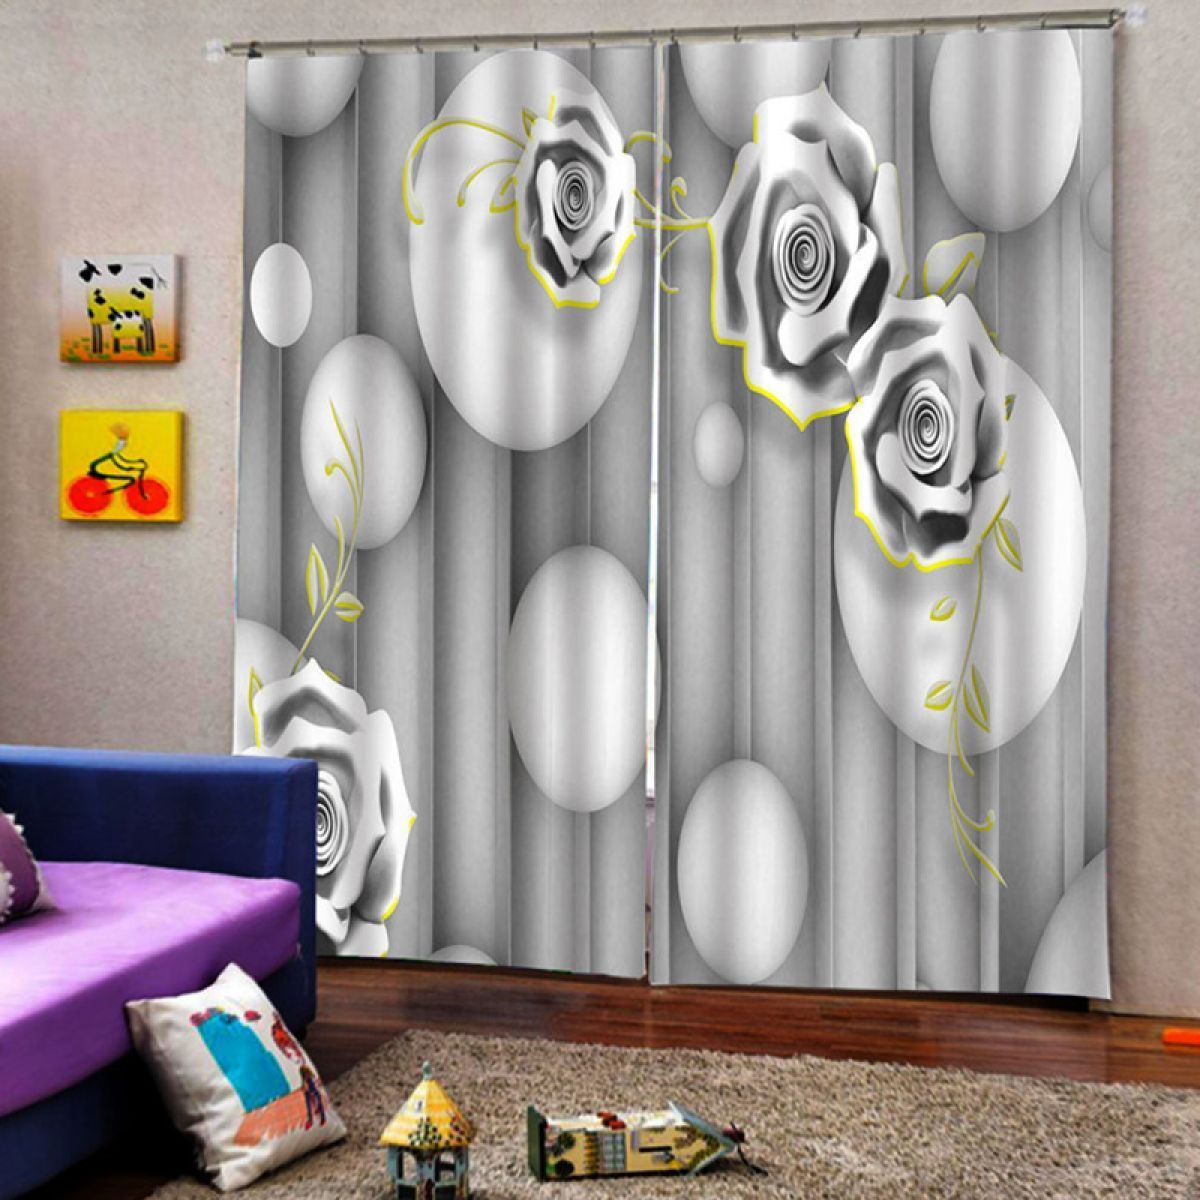 Black And White Rose Printed Window Curtain Home Decor